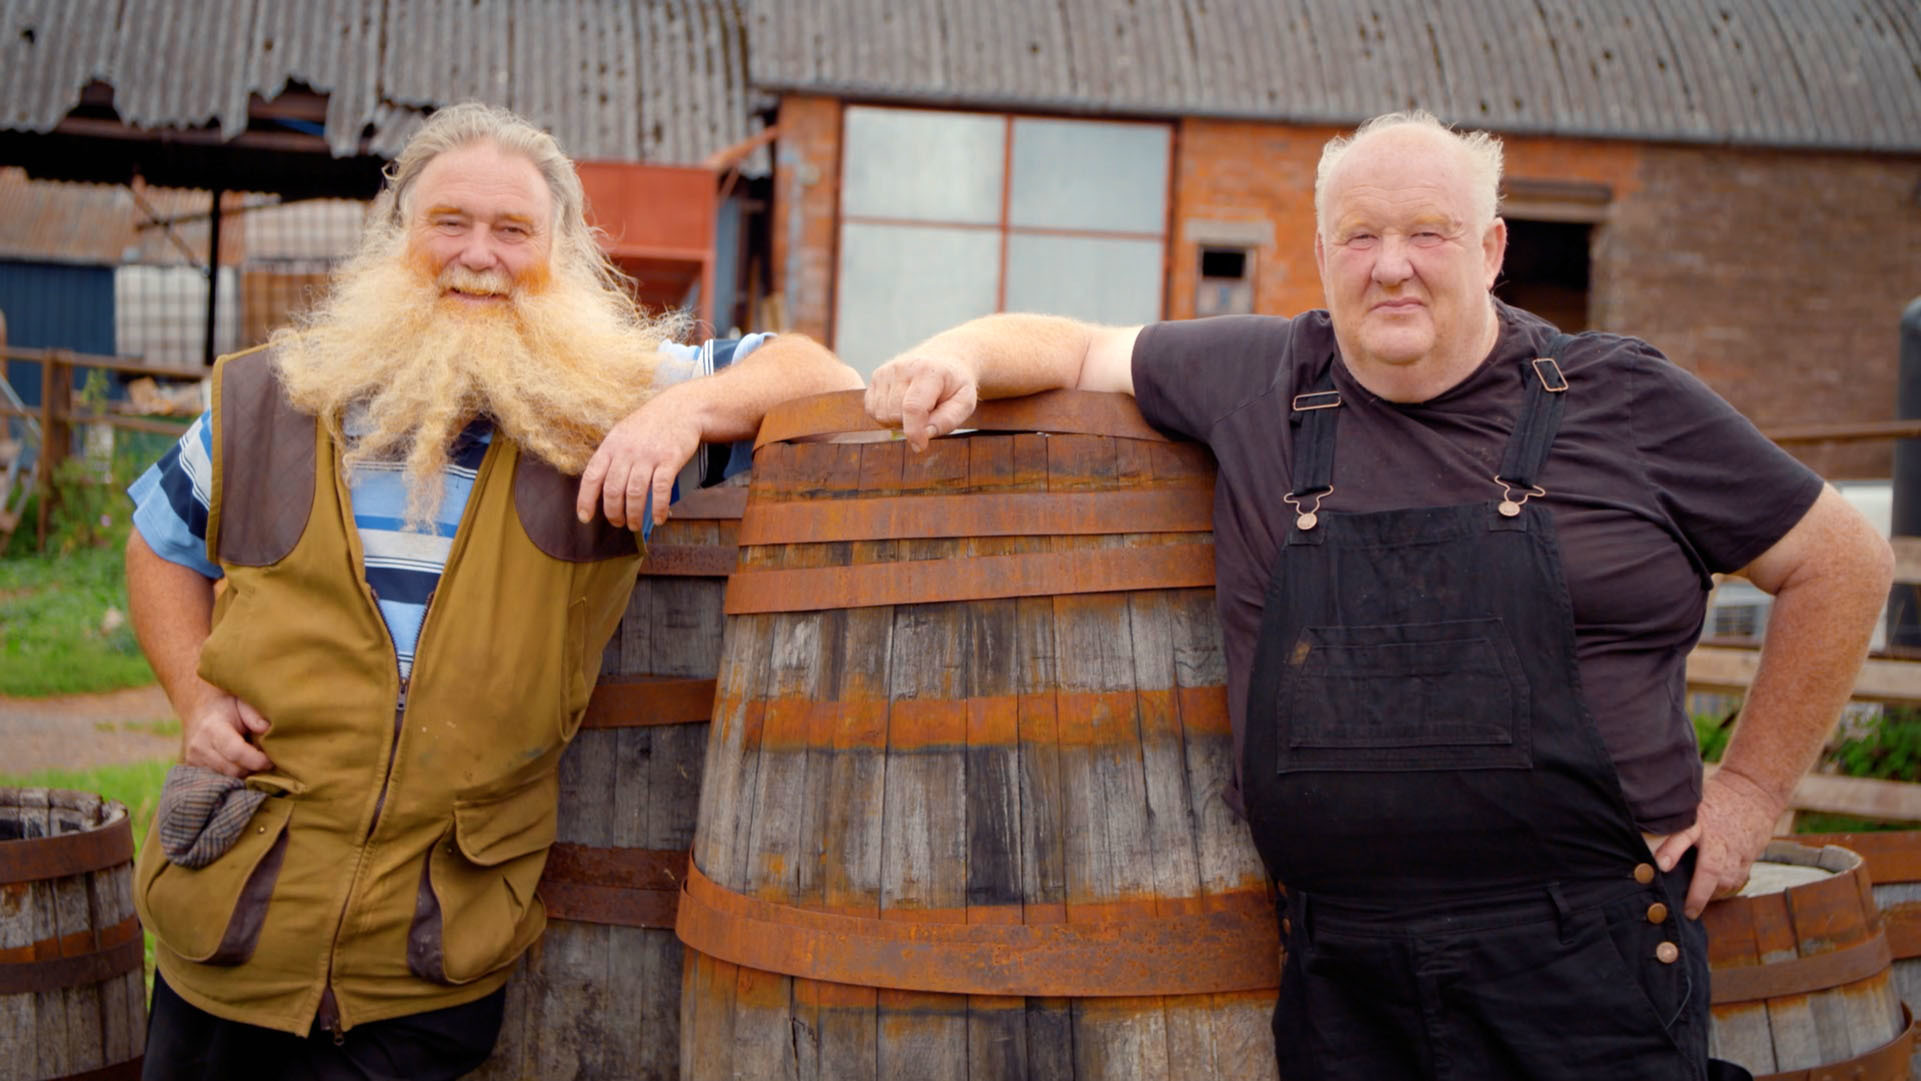 Denis and Eric on their family-run farm in Abbey Dore. Picture: BBC/Sidney Street/Endemol Shine UK